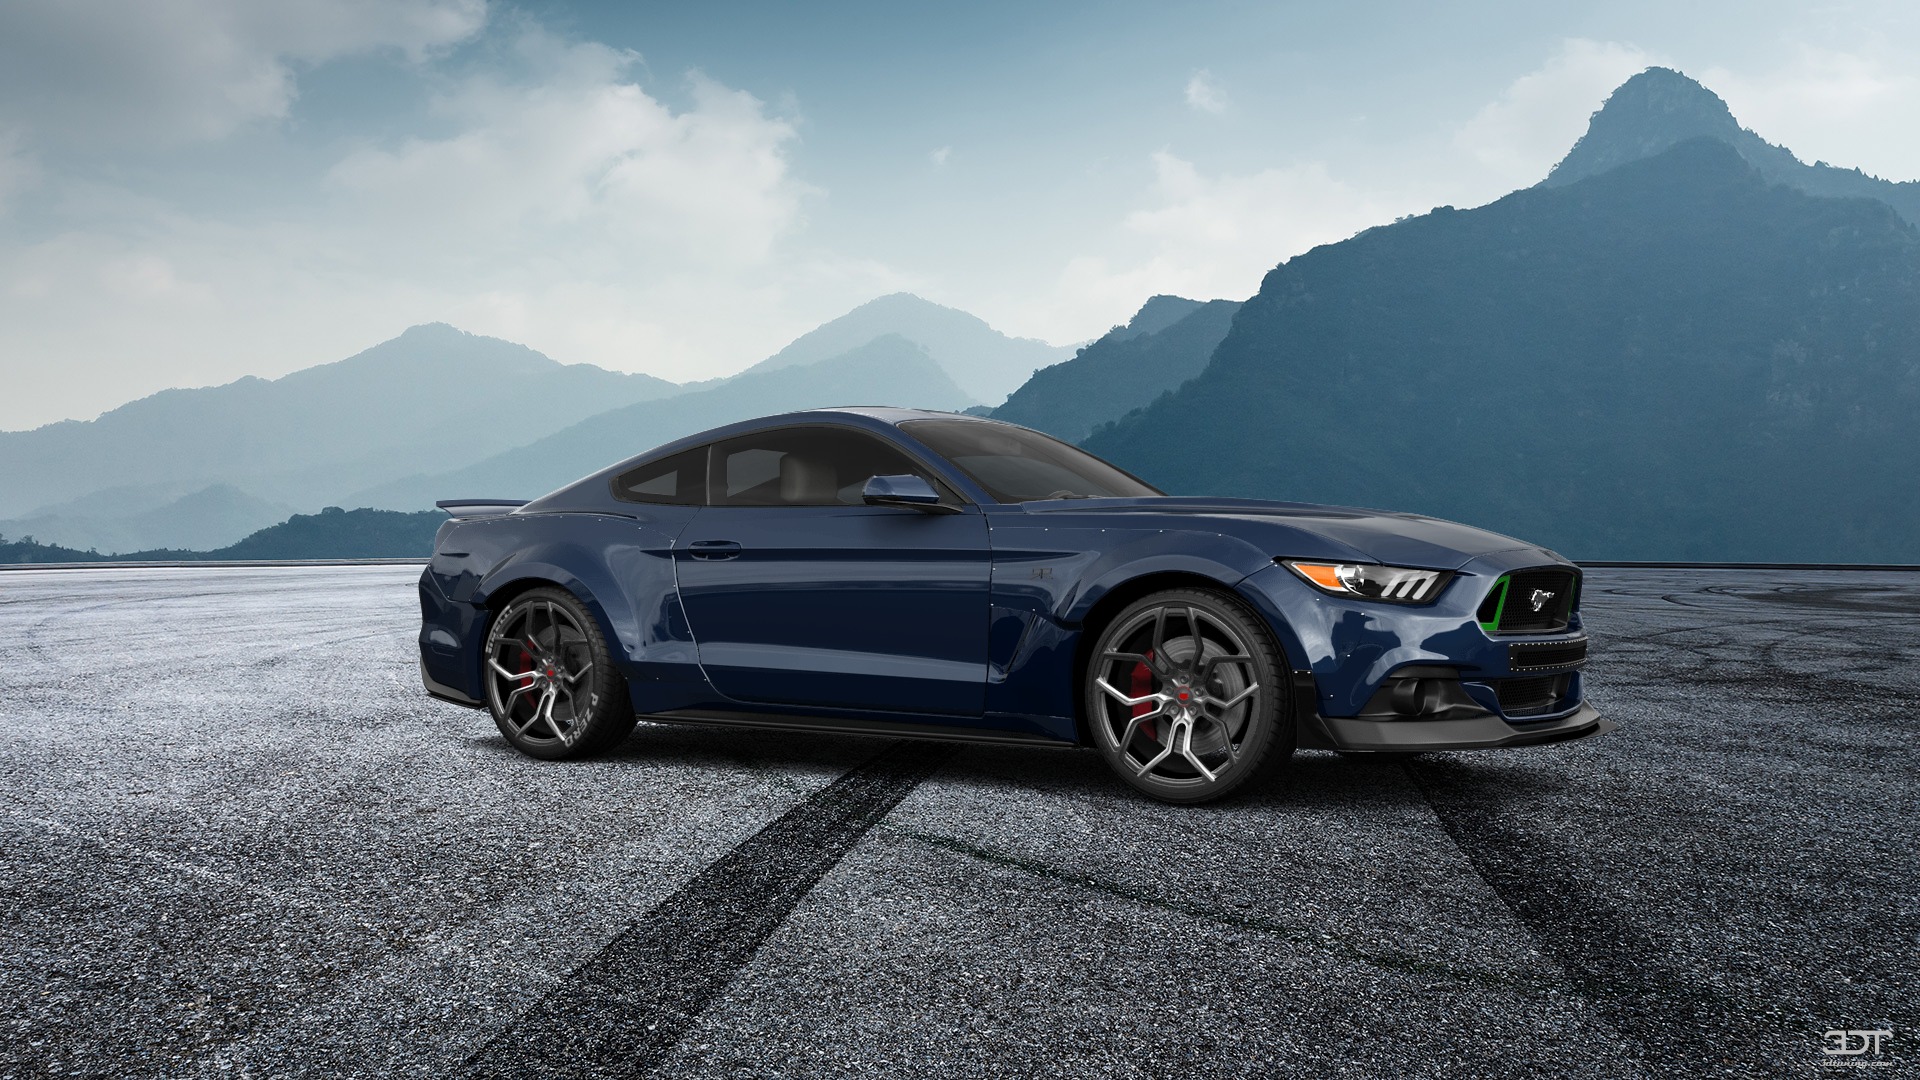 Ford Mustang GT350 2 Door Coupe 2015 tuning